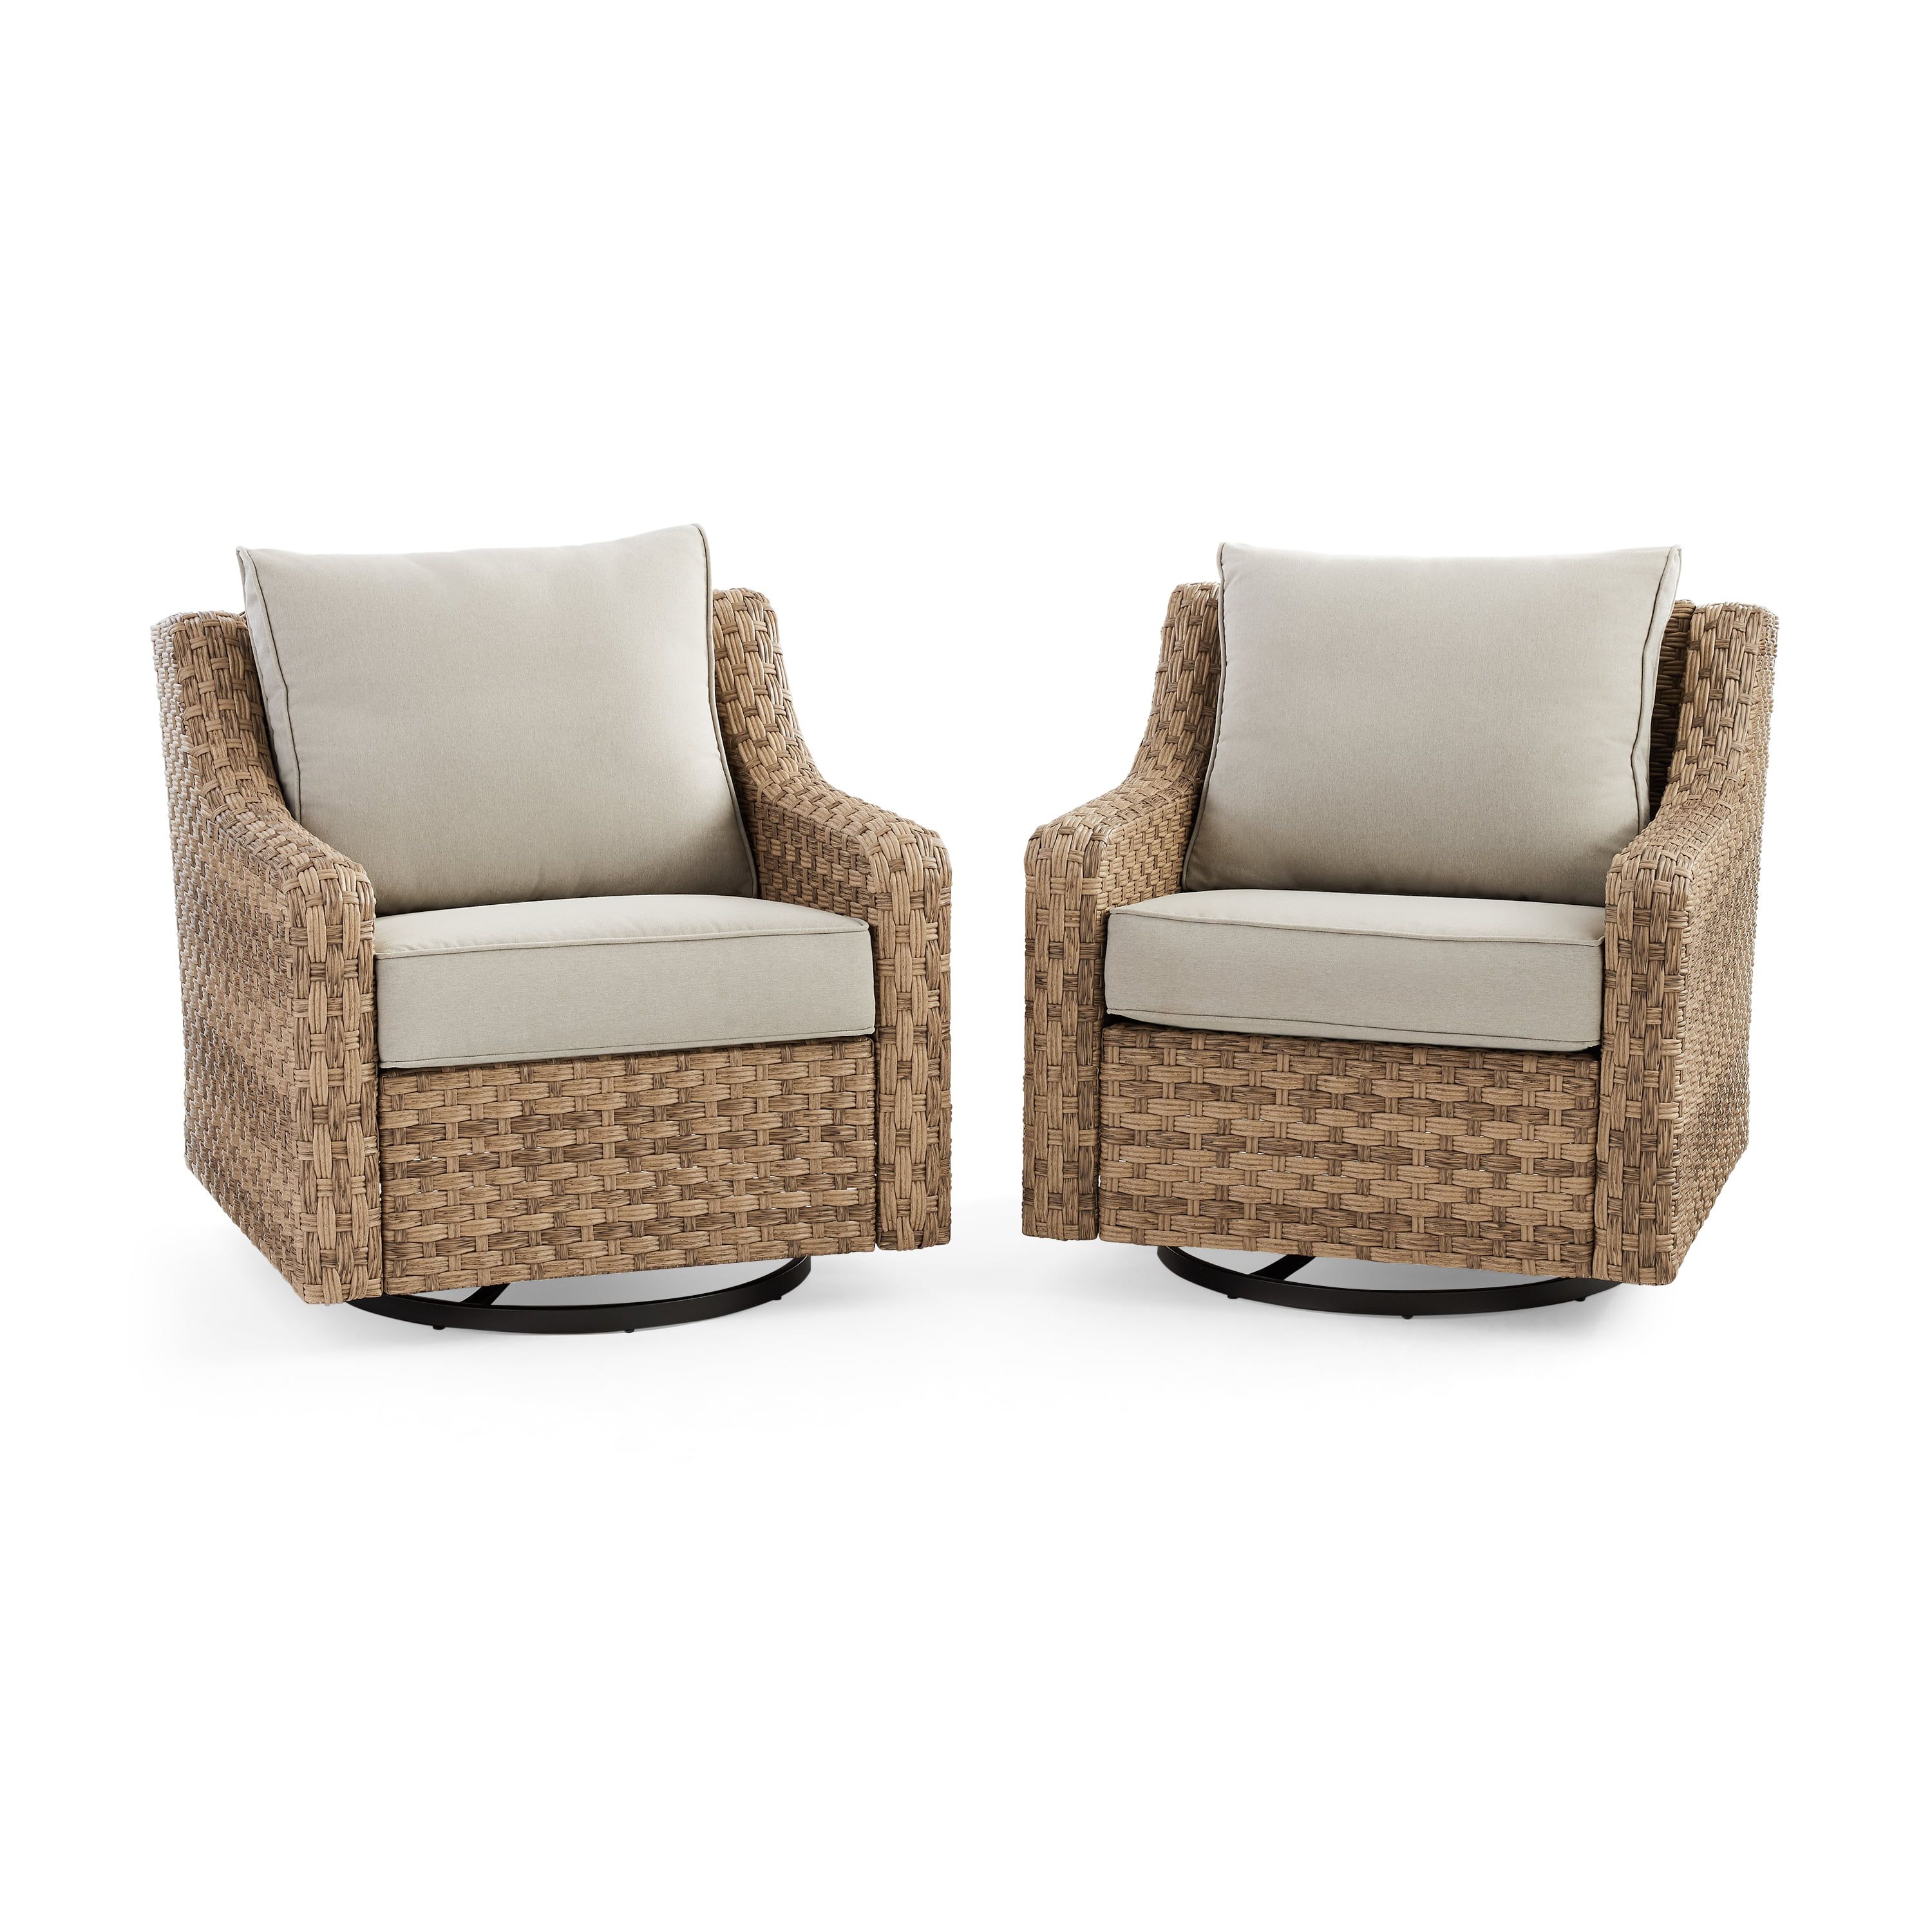 Popular 2 Piece Swivel Gliders With Patio Cover Pertaining To Better Homes & Gardens River Oaks 2 Piece Swivel Glider With Patio Cover –  Walmart (Photo 1 of 15)